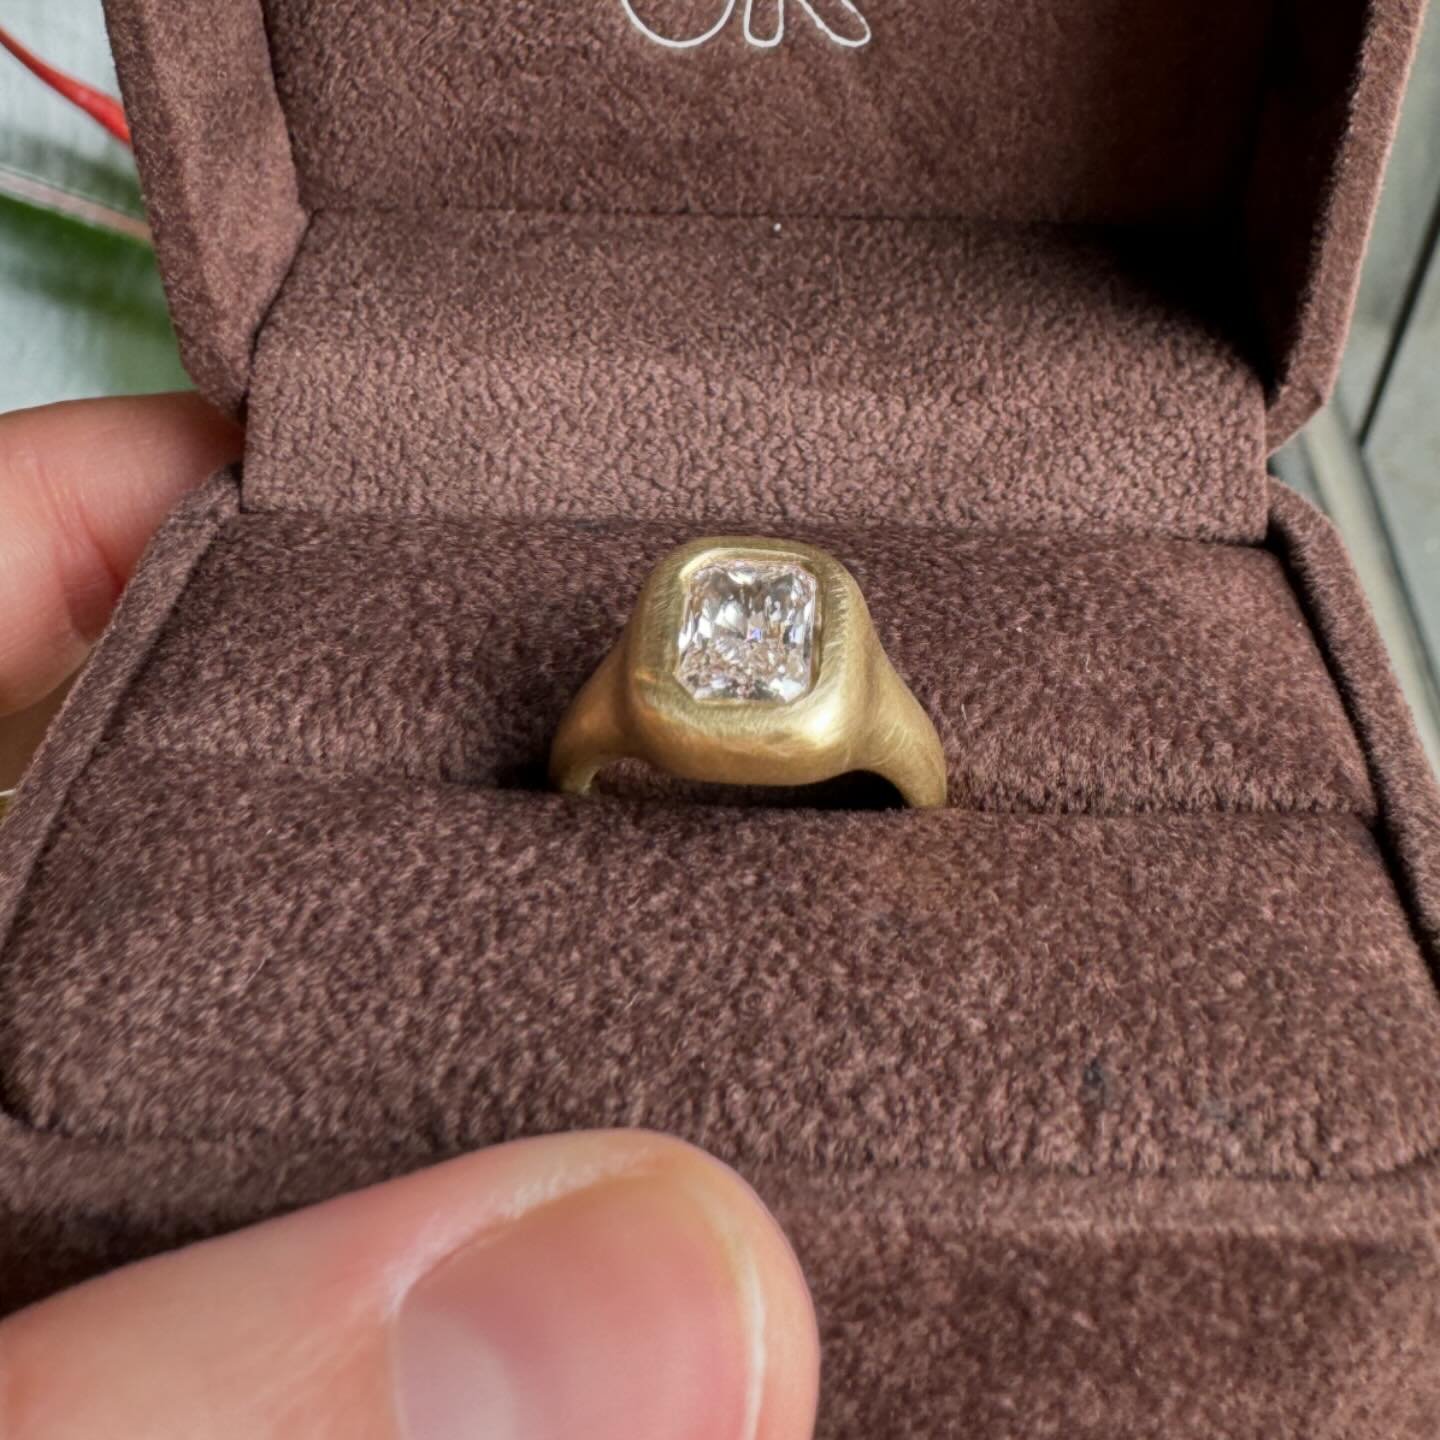 I love 🤍 
Radiant cut diamond in hand carved setting, 18k gold with a satin finish.